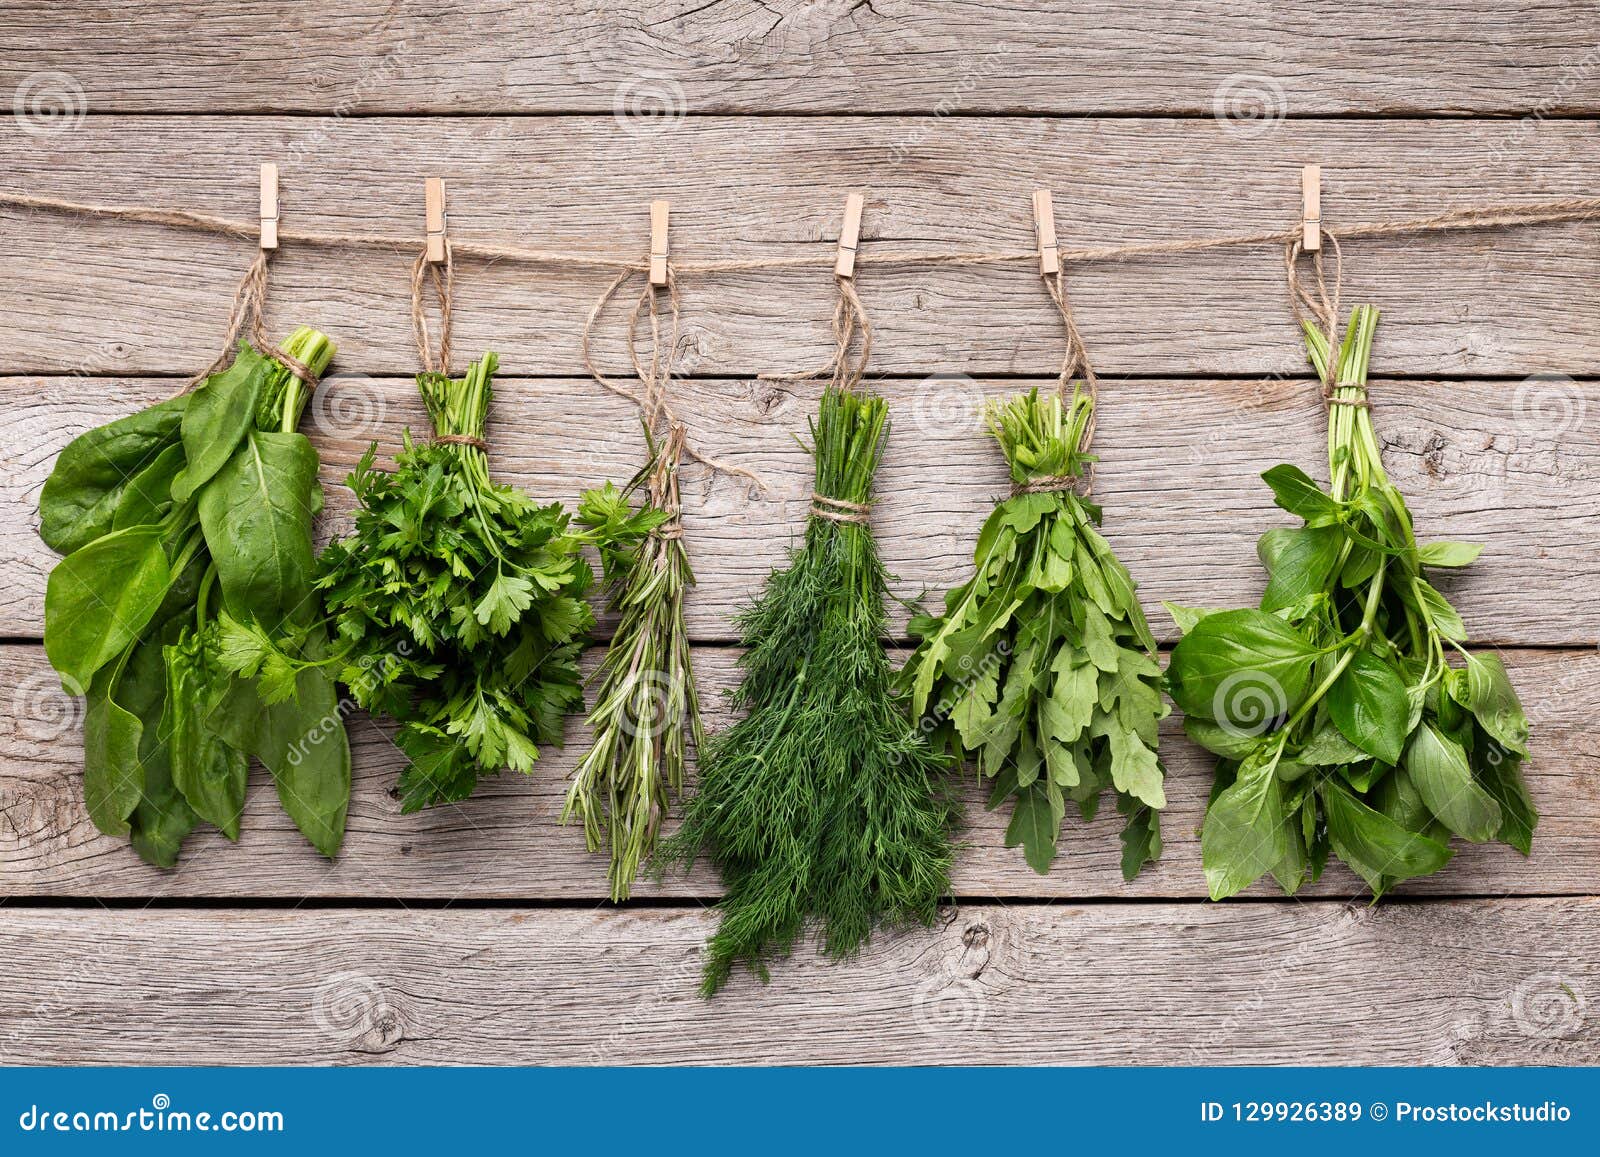 Collection of Fresh Herbs Hanging on Wooden Background Stock Image